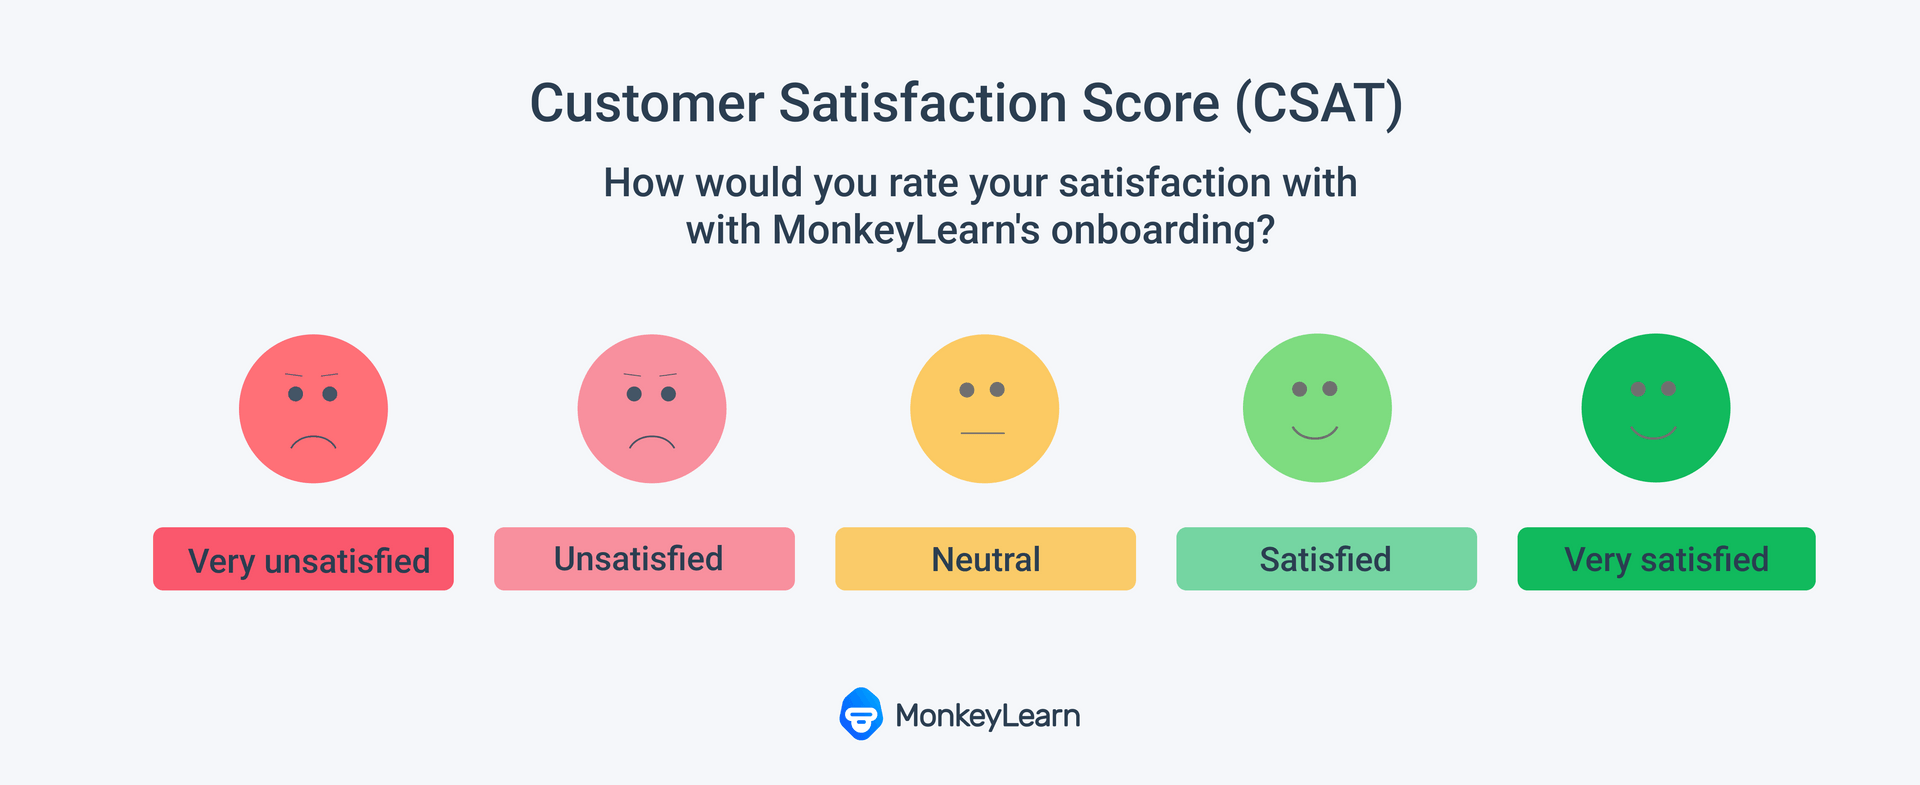 CSAT: How would you rate your satisfaction with MonkeyLearn with a scale from very unsatisfied to very satisfied.